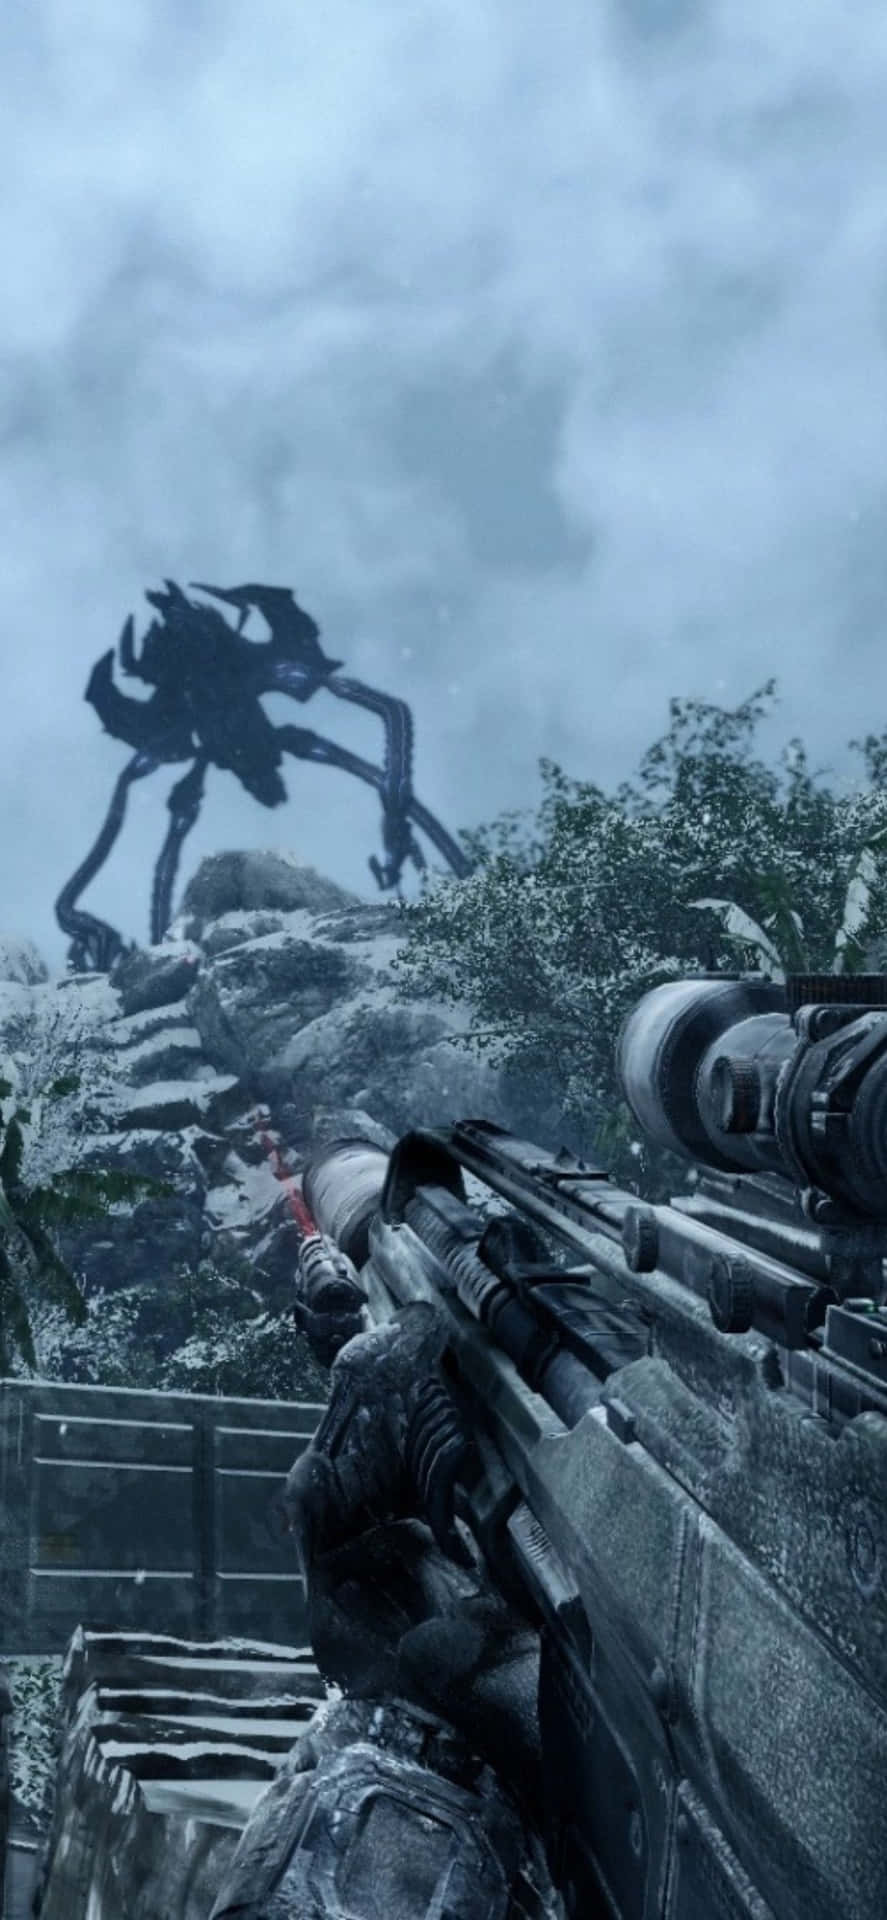 "Command the battlefield with legendary power and visuals on the iPhone Xs Max Crysis Warhead."